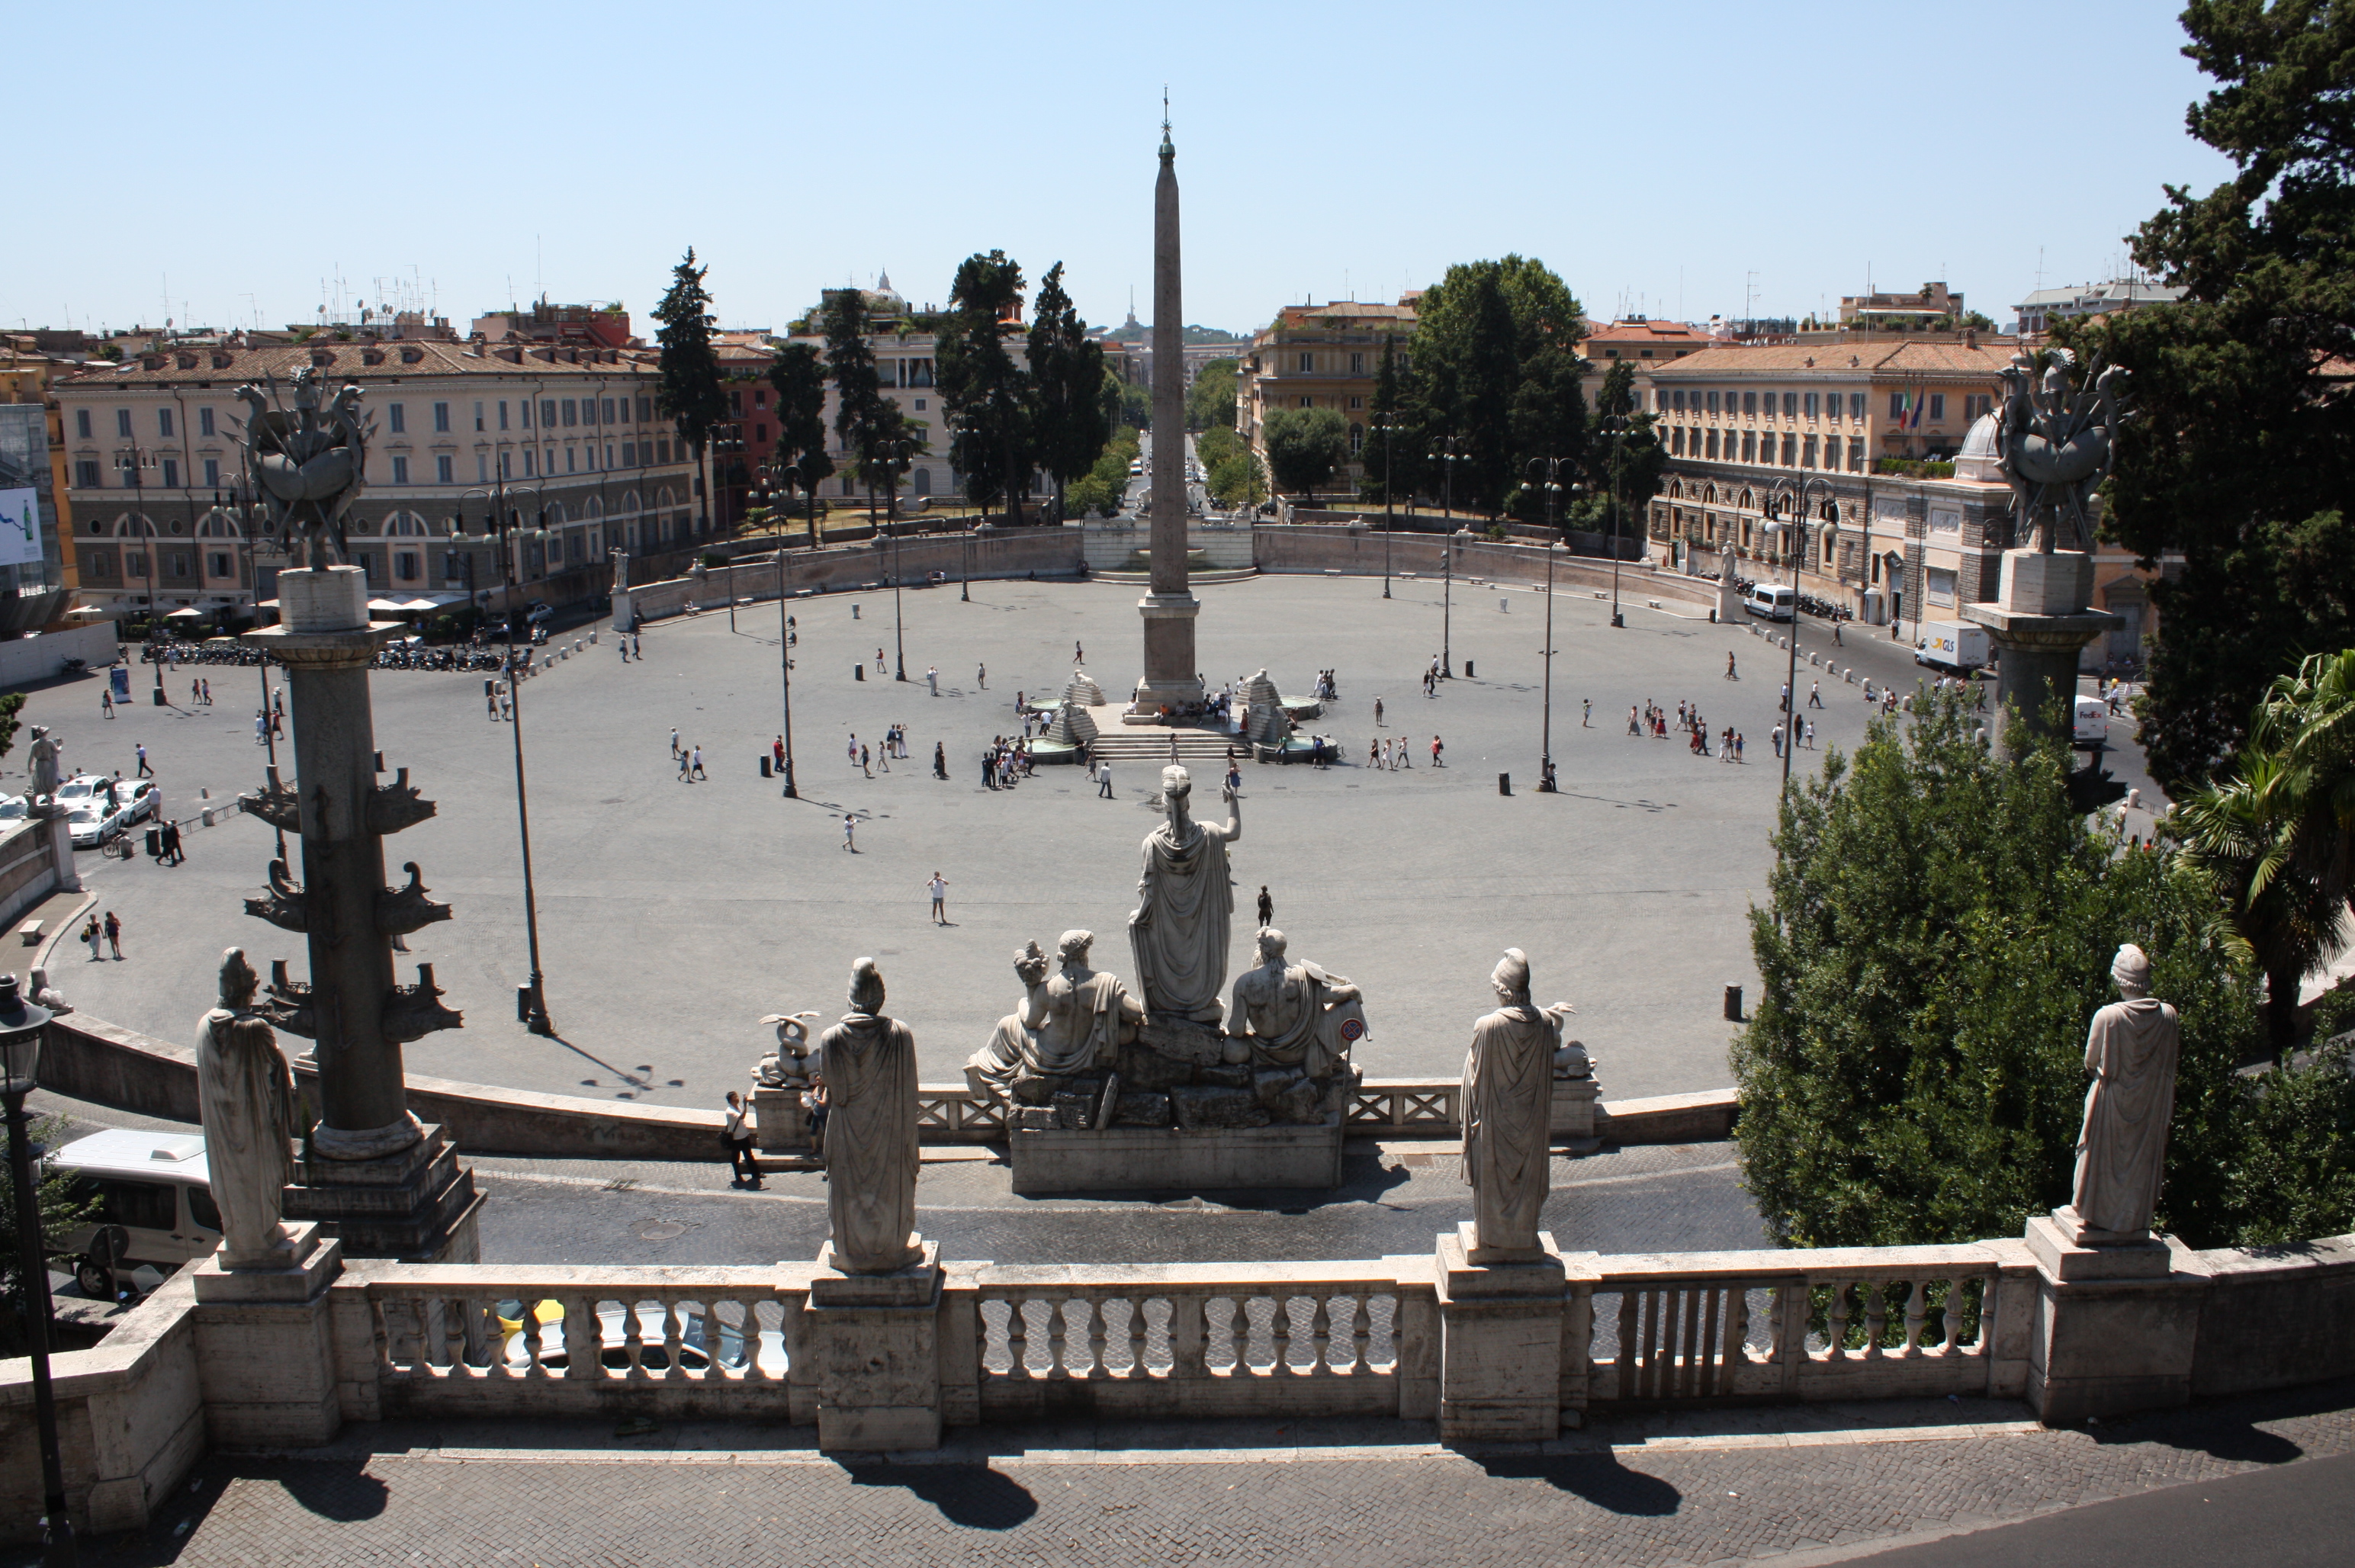 Image of Statues overlooking the Piazza